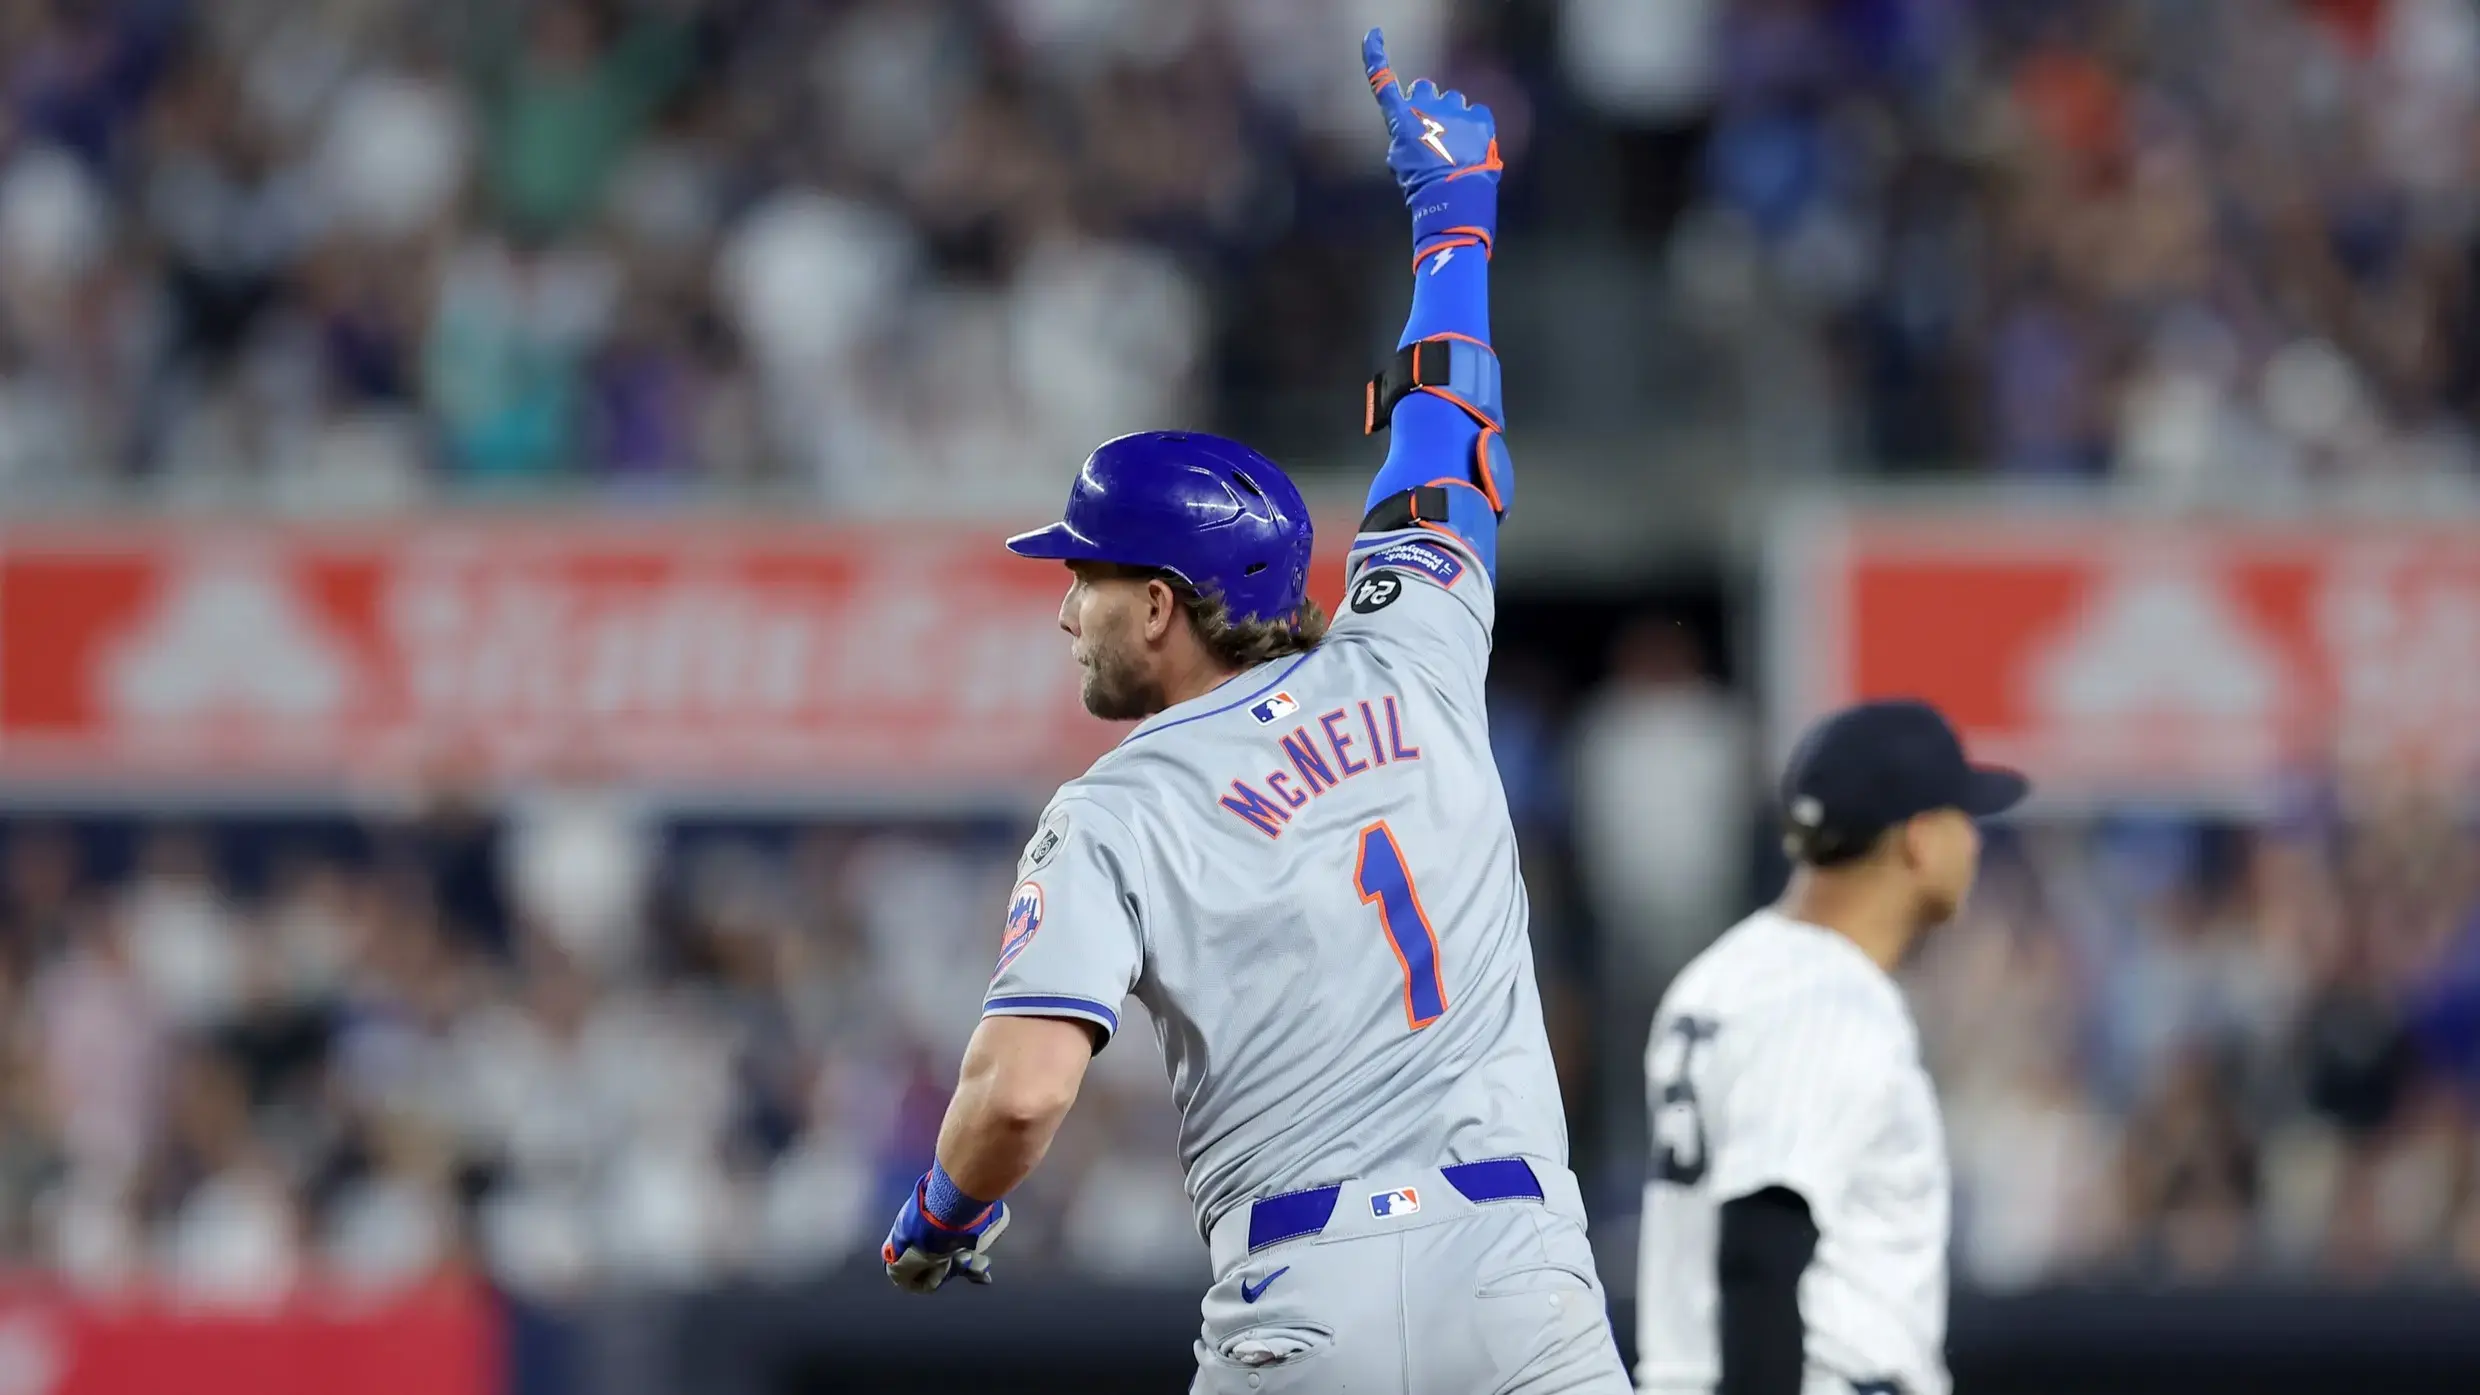 Mets' Jeff McNeil feeling more confident as power surge continues: 'I feel like myself'